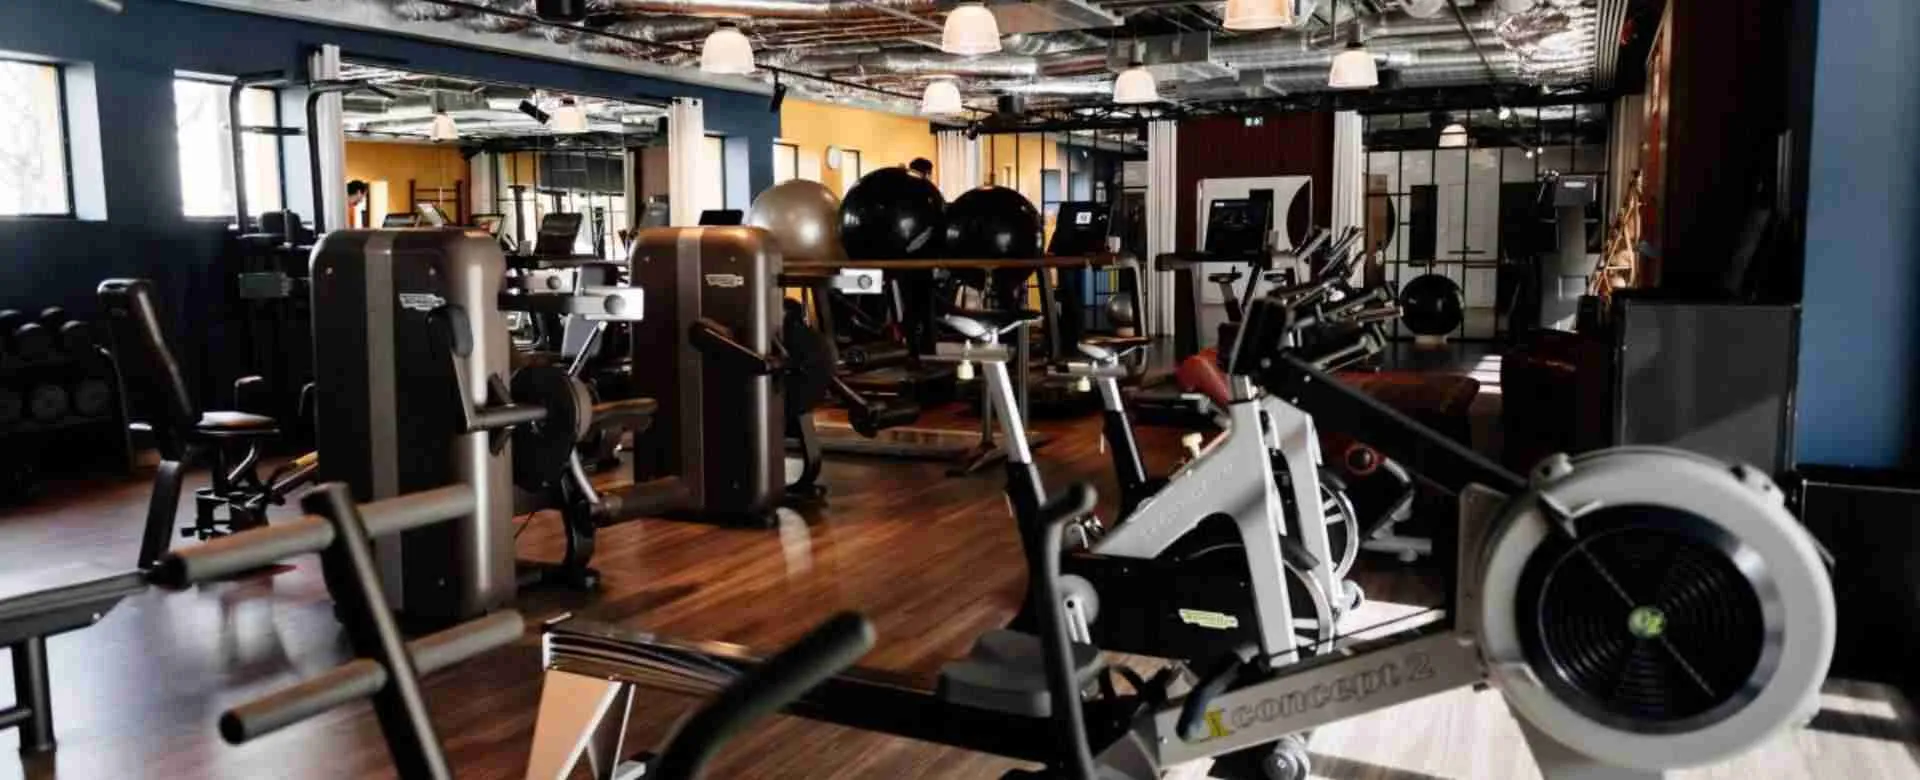 Winning hotel Molitor Paris as the best hotel gym in the city